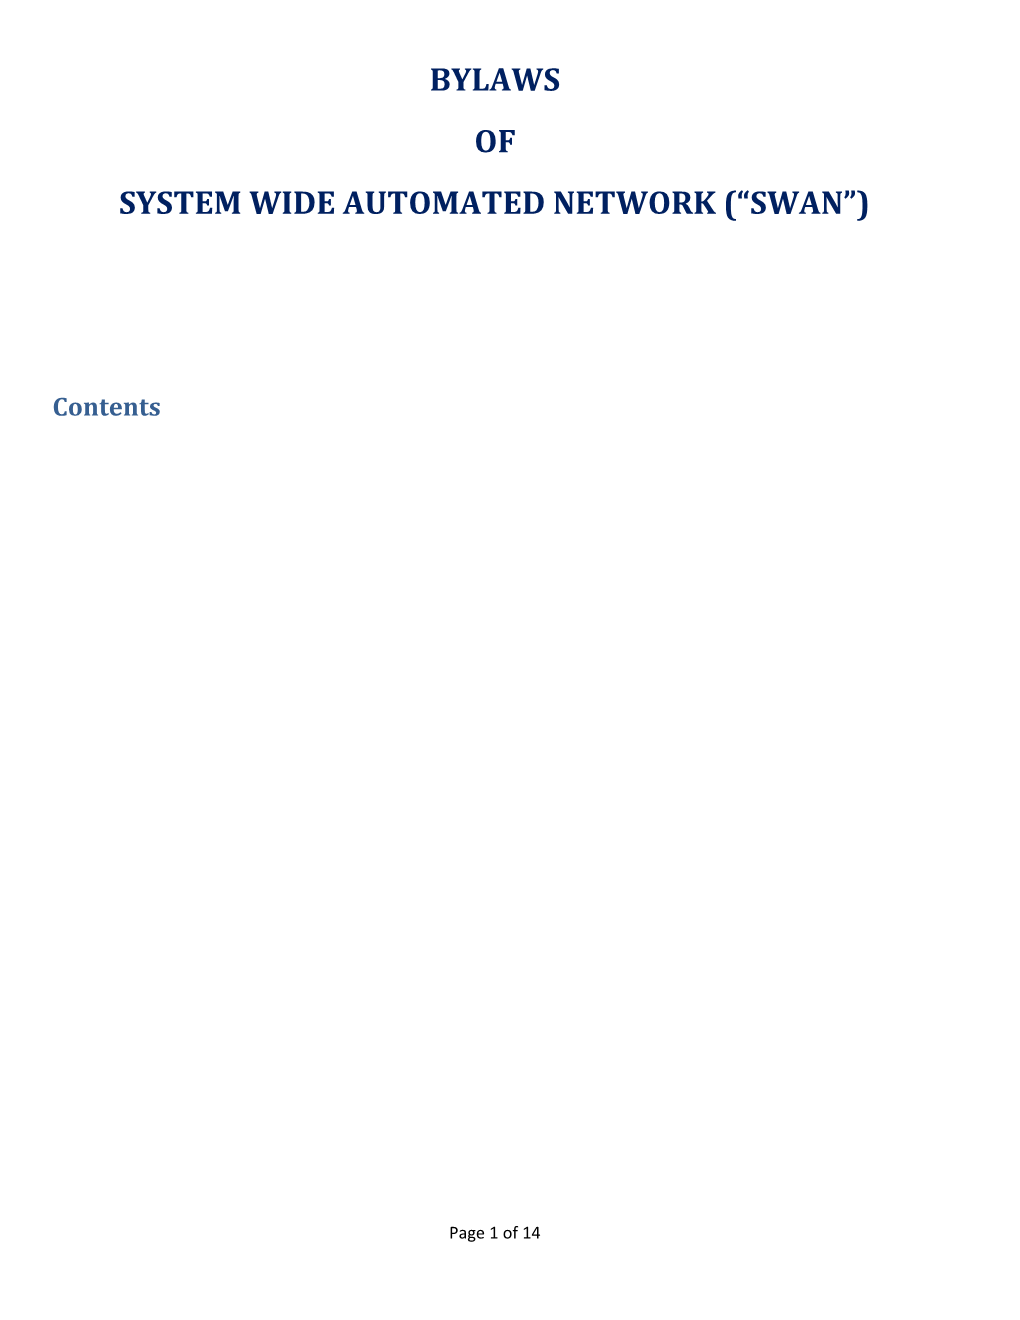 System Wide Automated Network ( Swan )